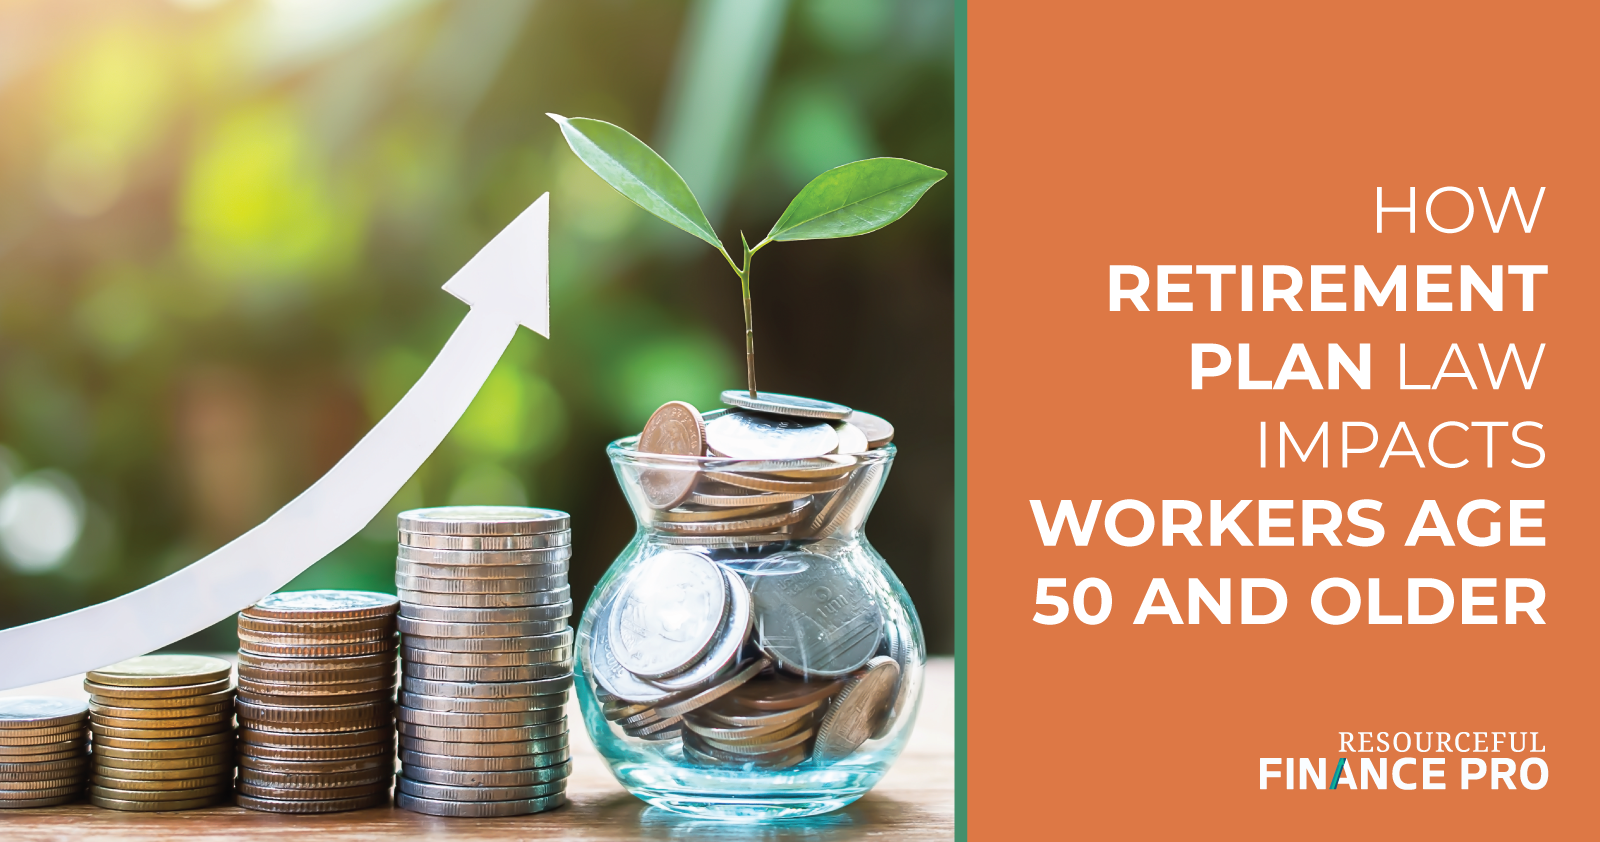 How retirement plan law impacts workers age 50 and older